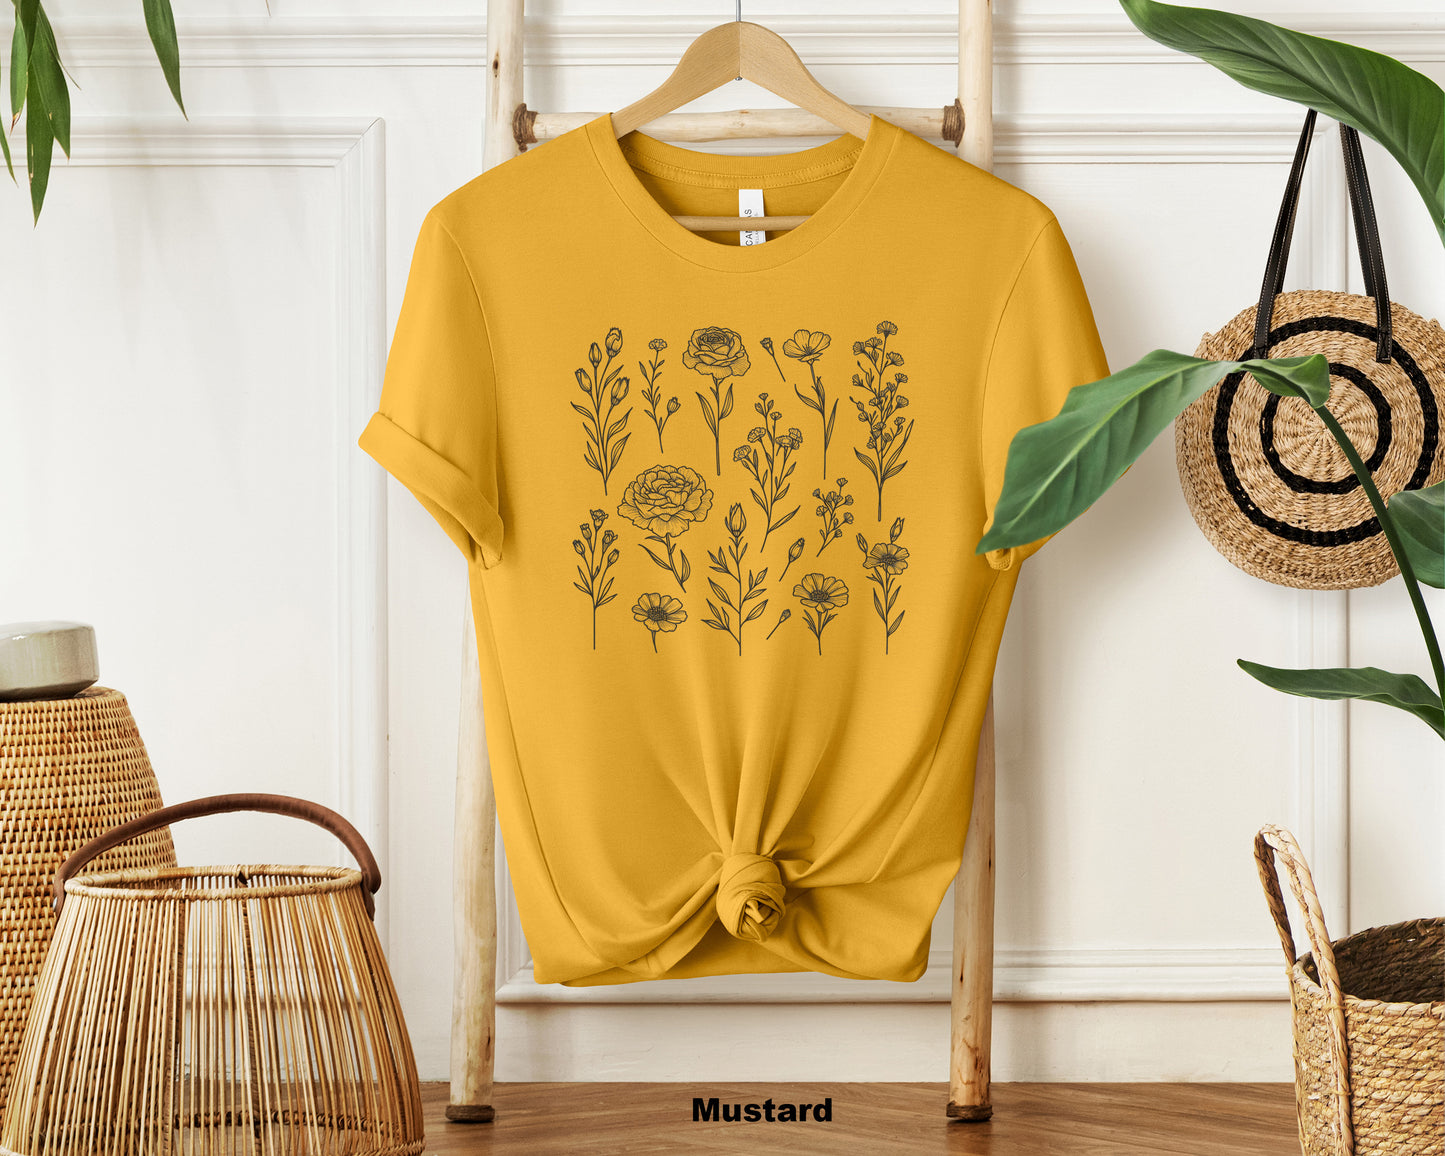 Nature's Whispers Wildflower Pattern Shirt - Minimalist Floral Tee